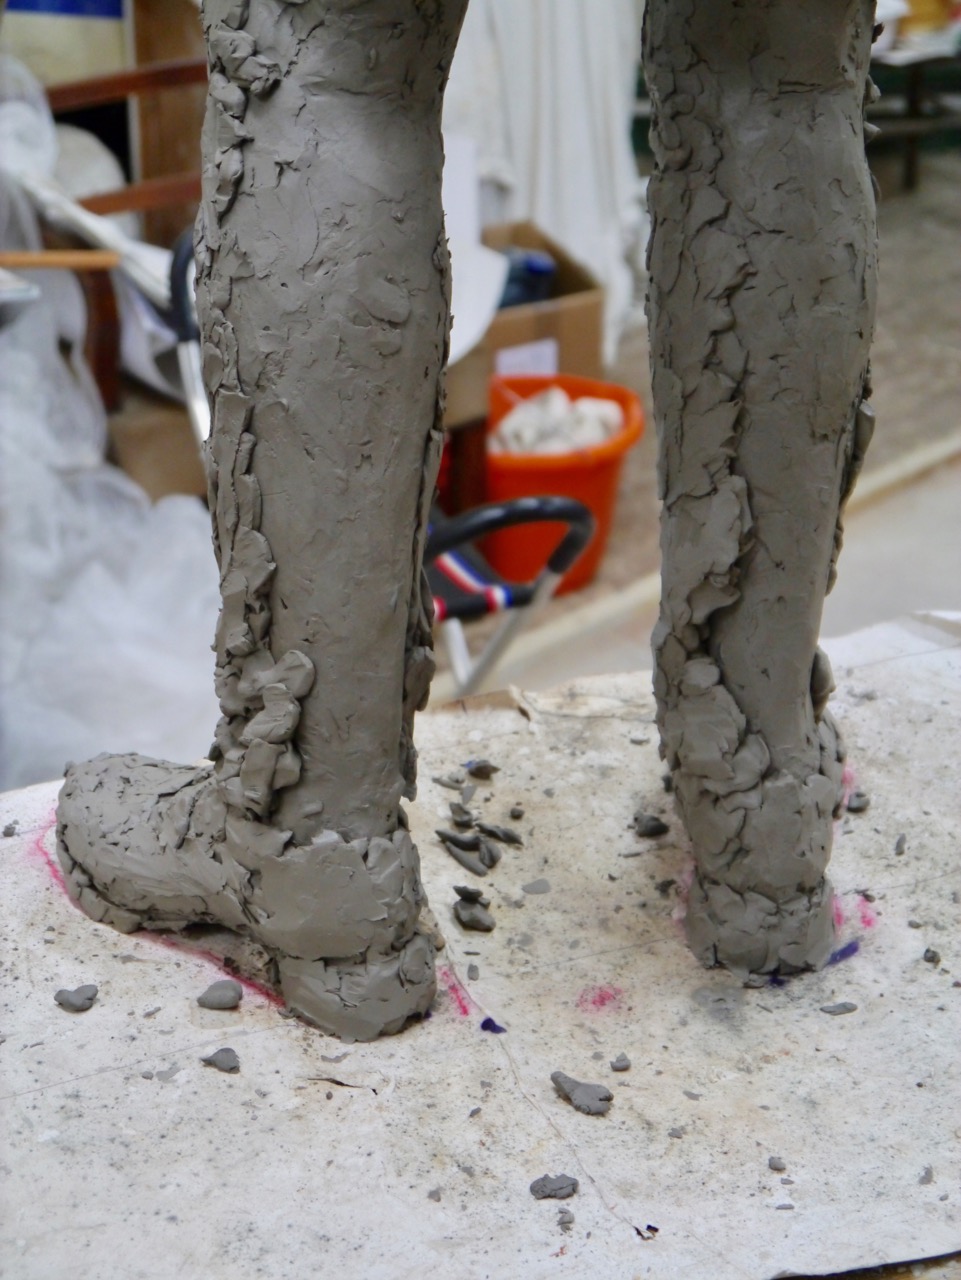 The trousers are sculpted over the legs